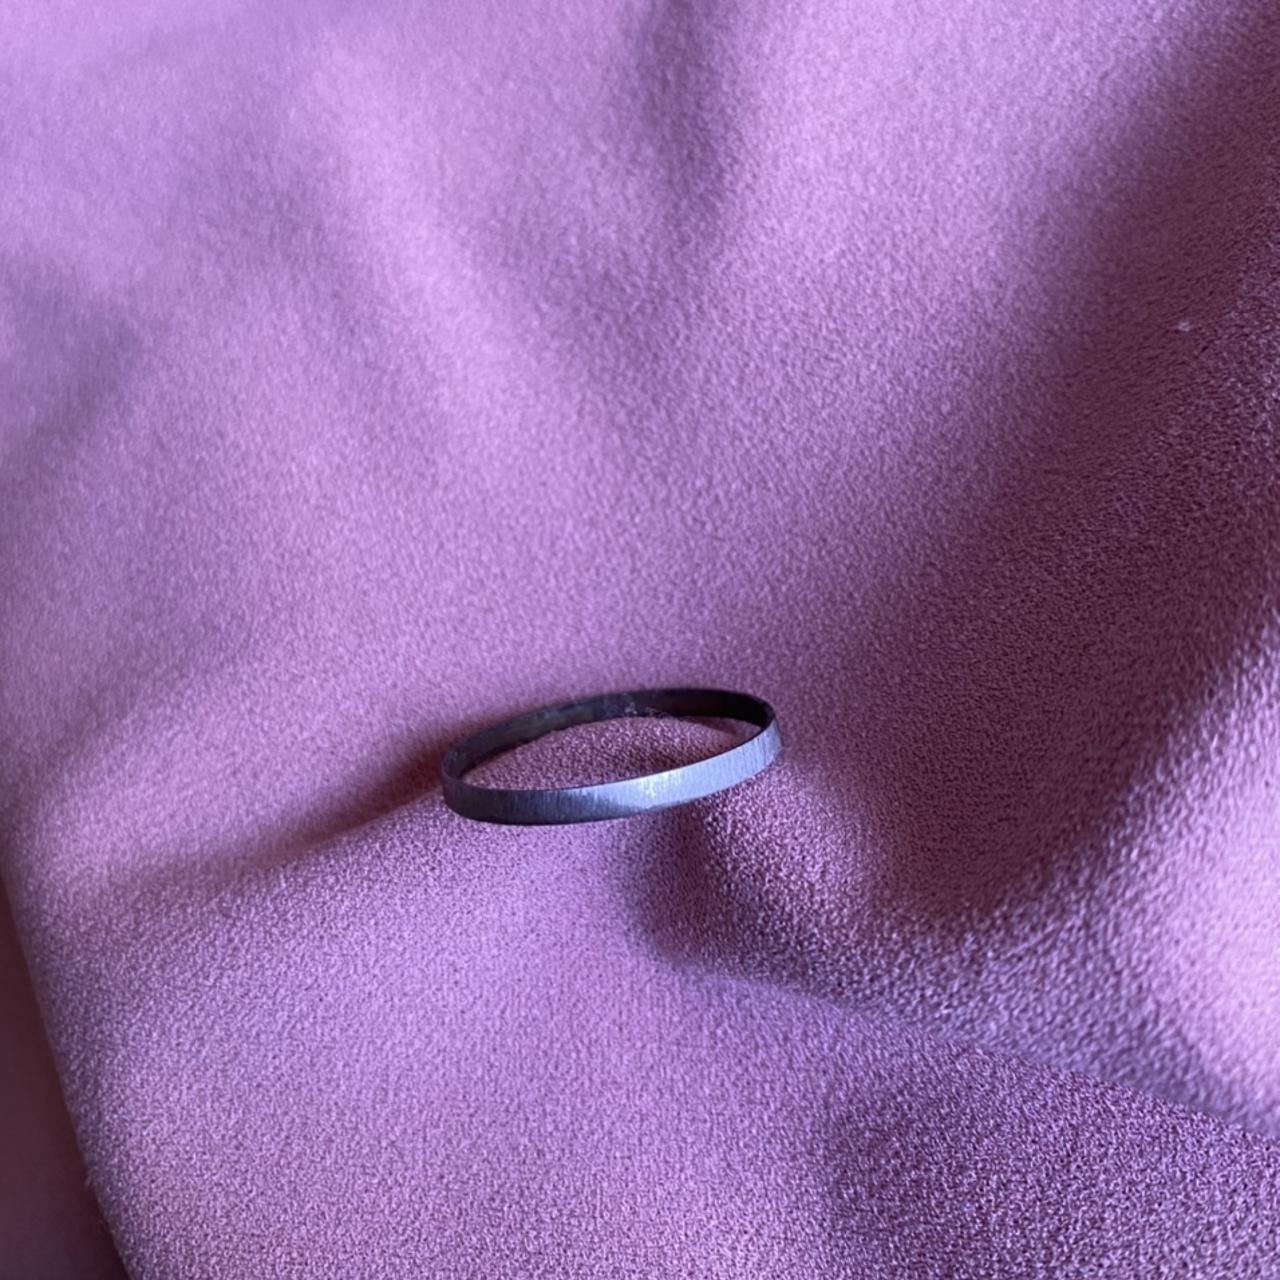 Product Image 4 - Silver / reflective band ring